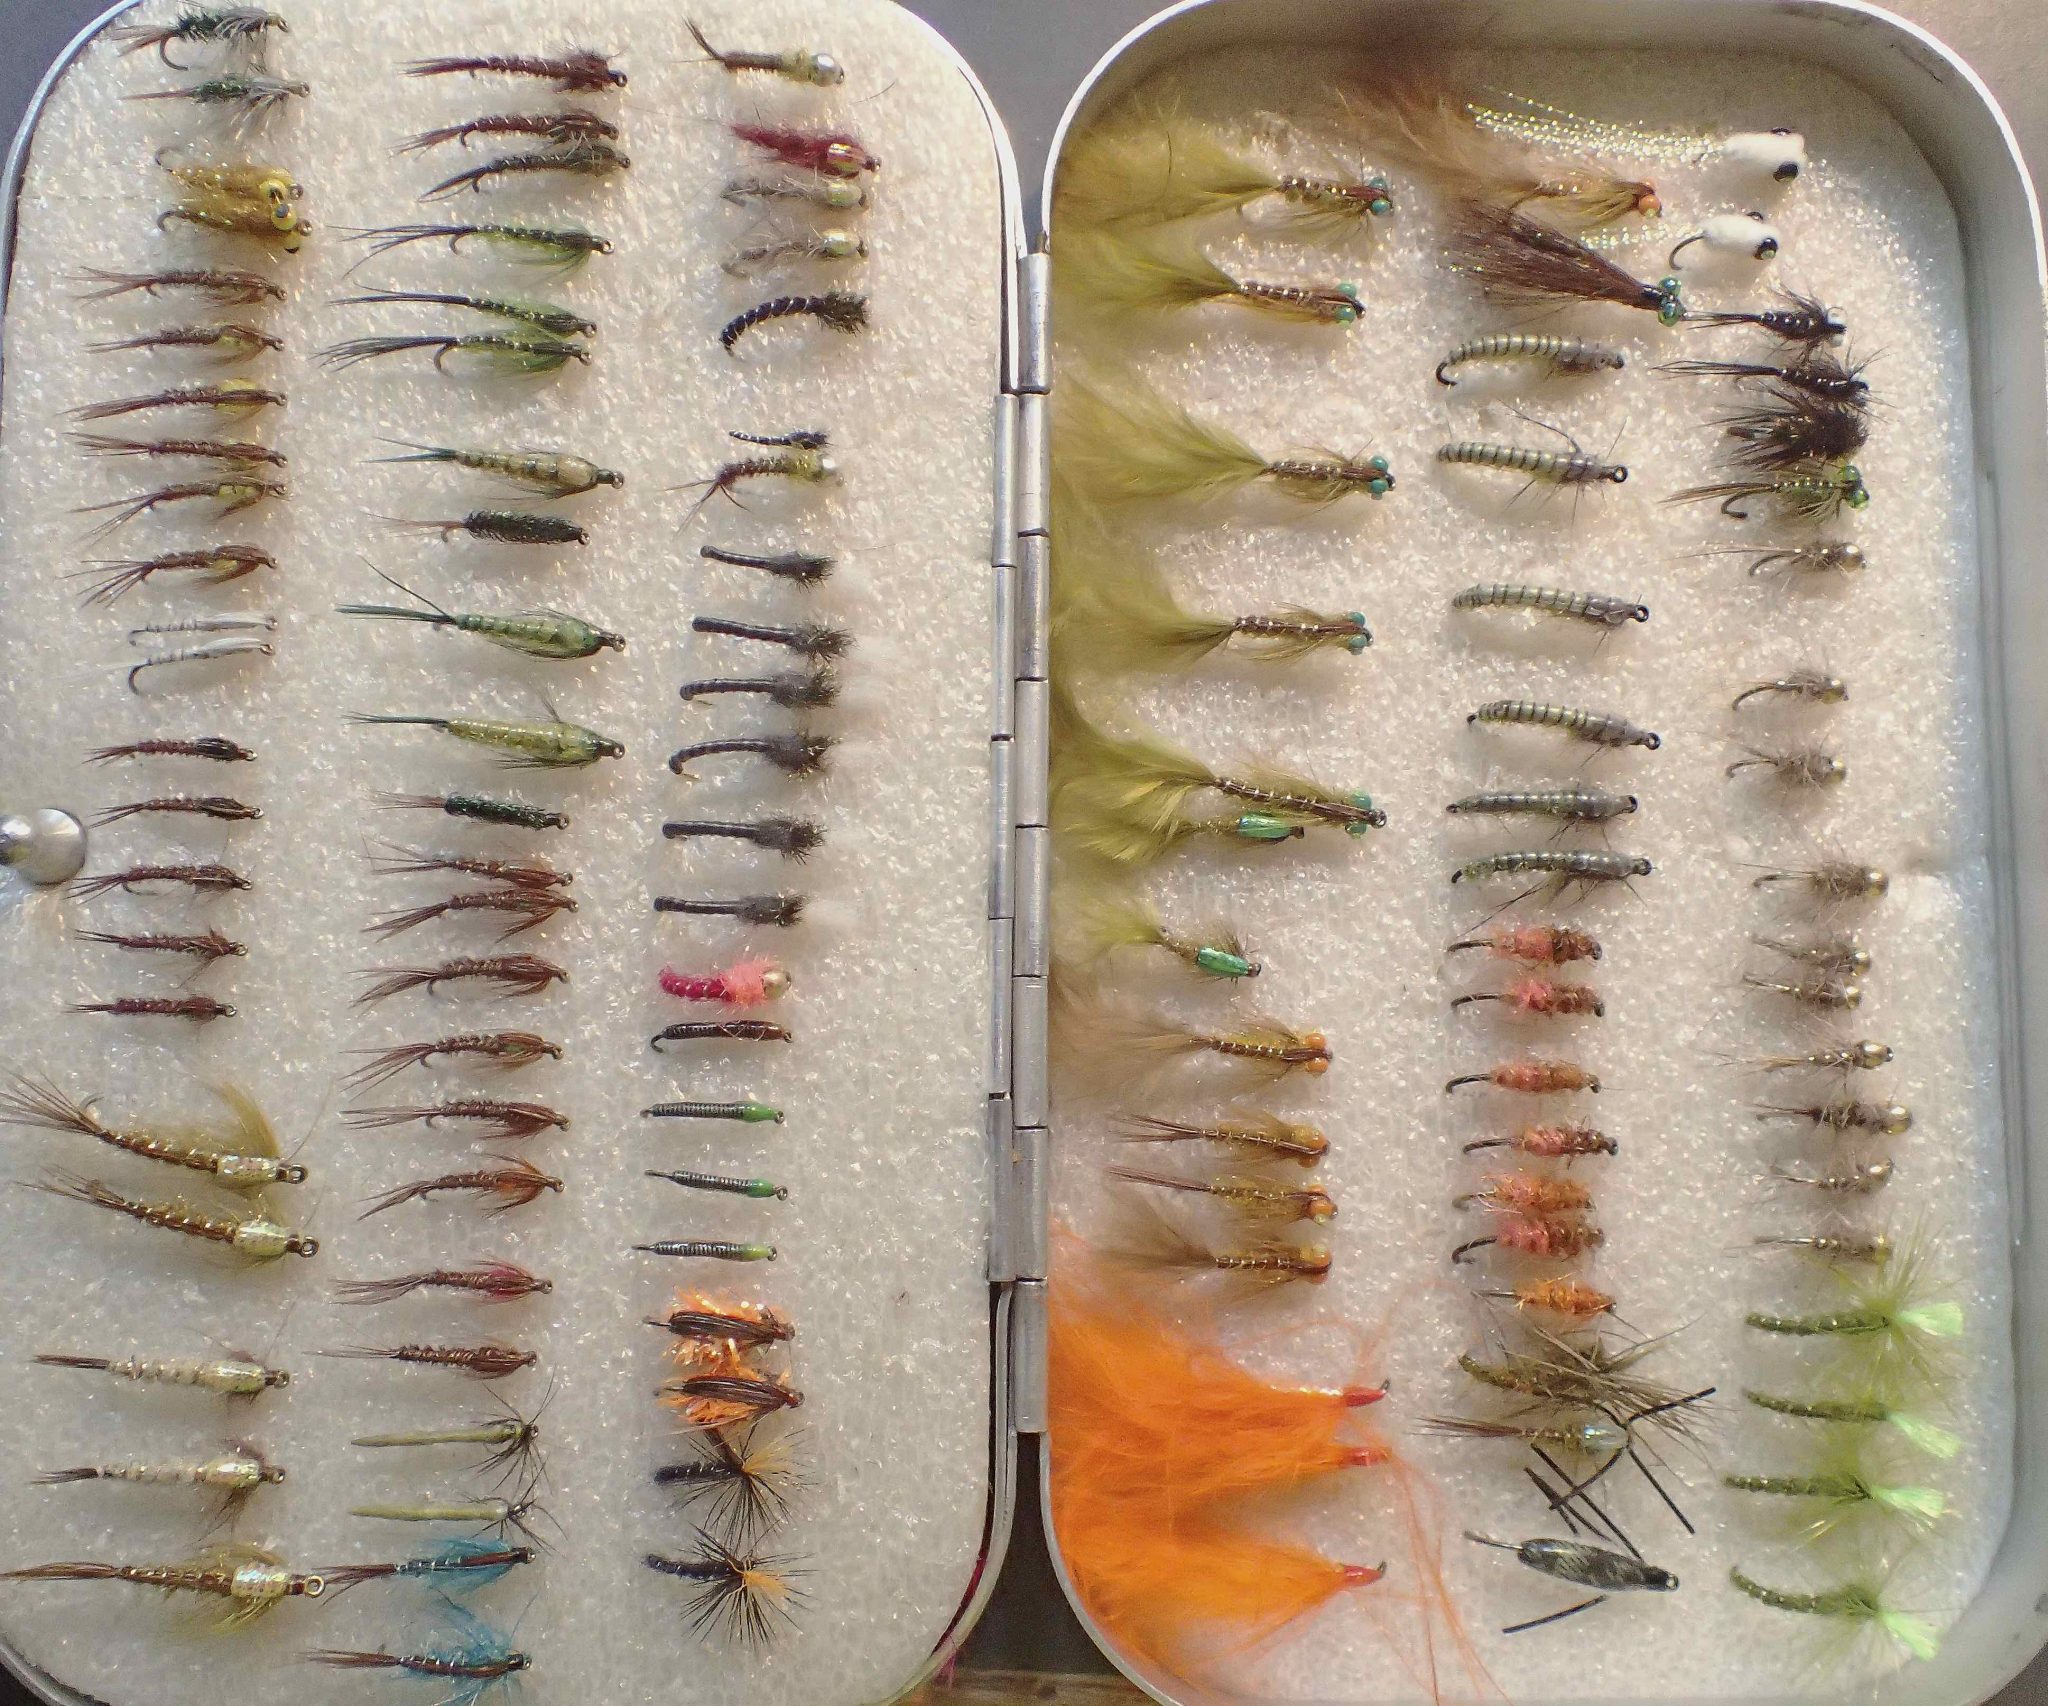 The salmon season in a box - Salmon Fishing Flies from Helmsdale Company